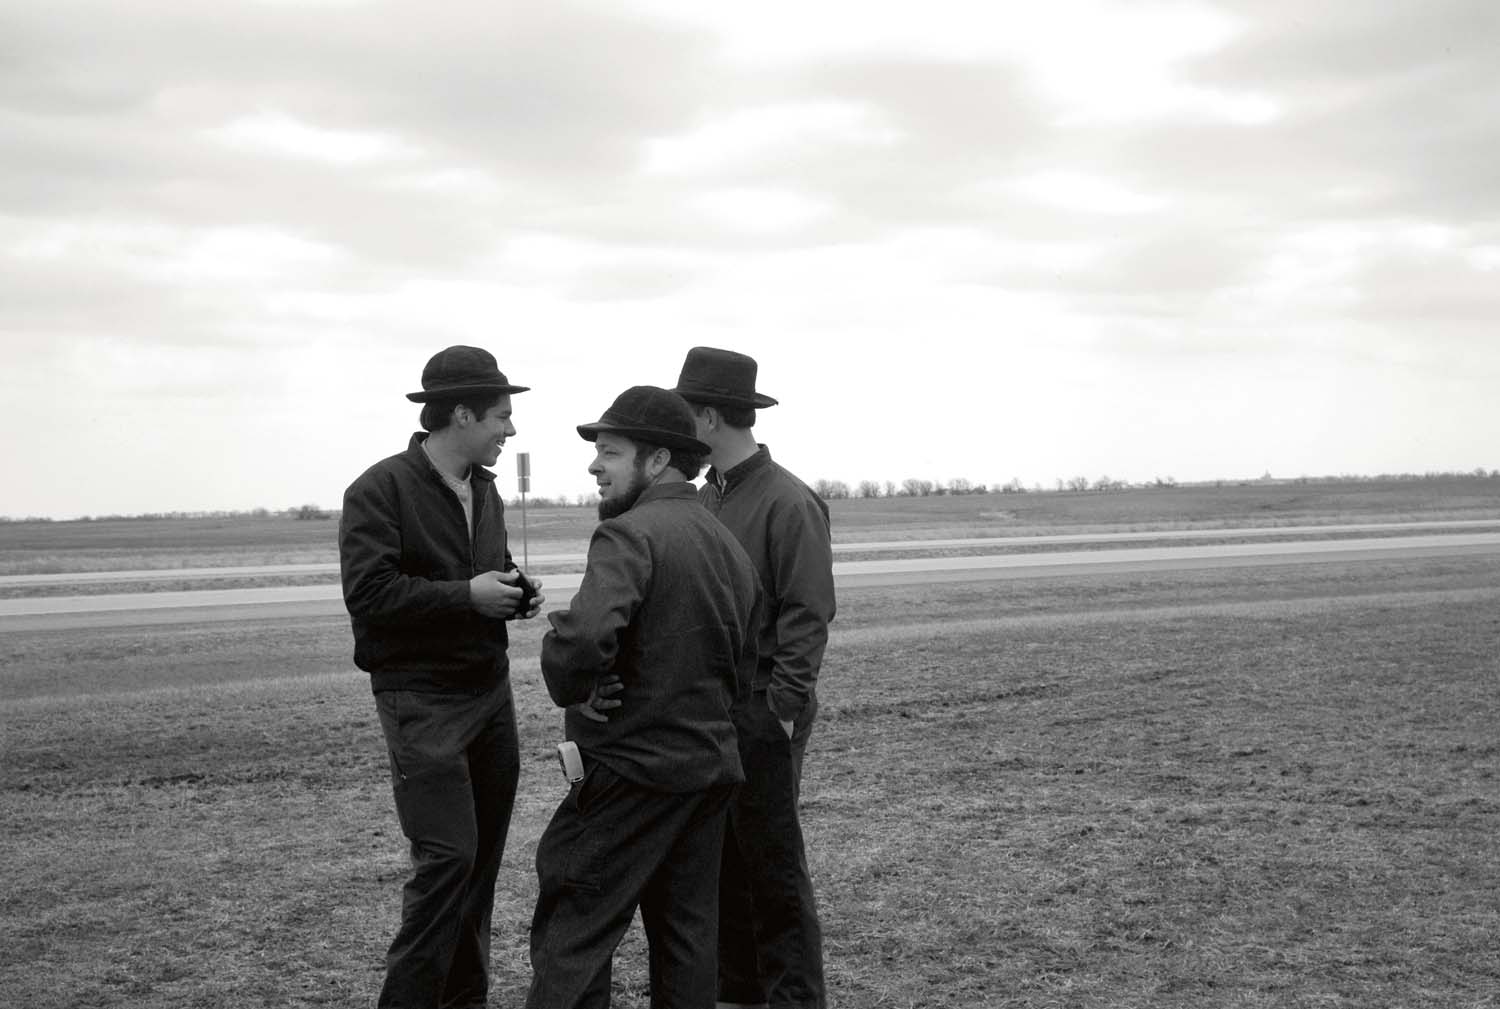  Three young Mennonite men standing together at an auction near Denver, IL. March, 2011 